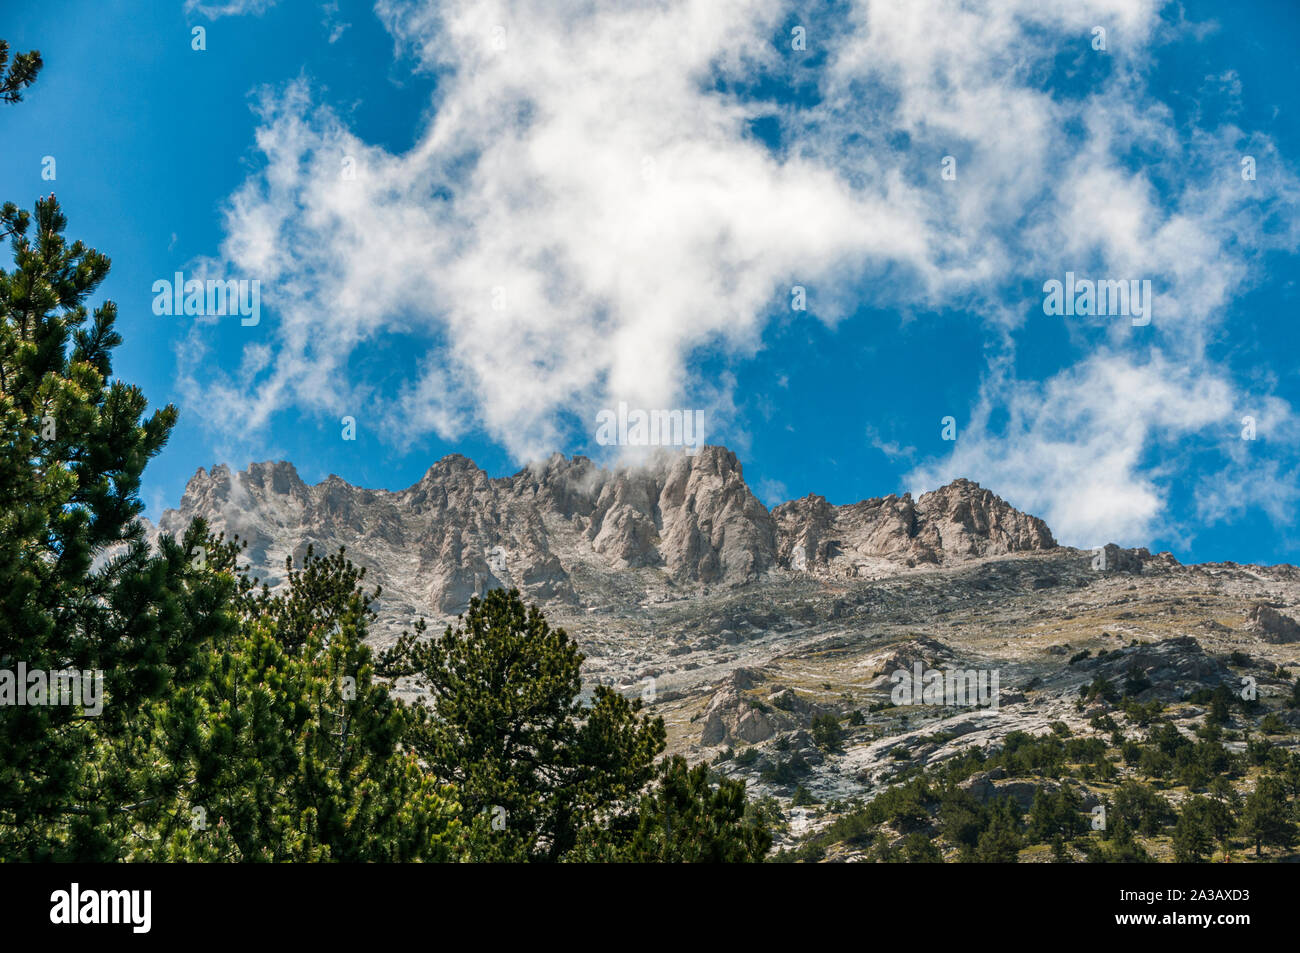 The high peaks of mountain Olympus in Greece as seen from refuge A in summer Stock Photo